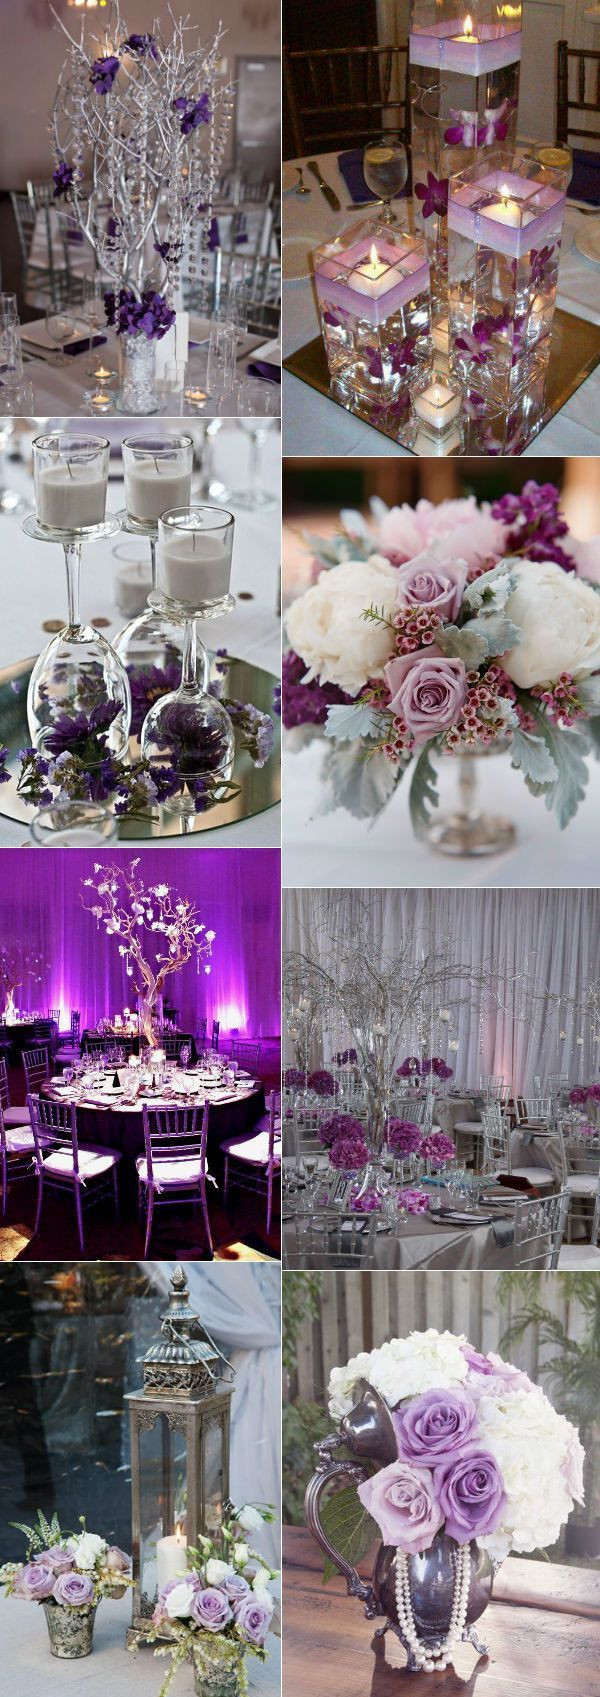 Black And Silver Wedding Decorations
 Stunning Wedding Color Ideas In Shades Purple And